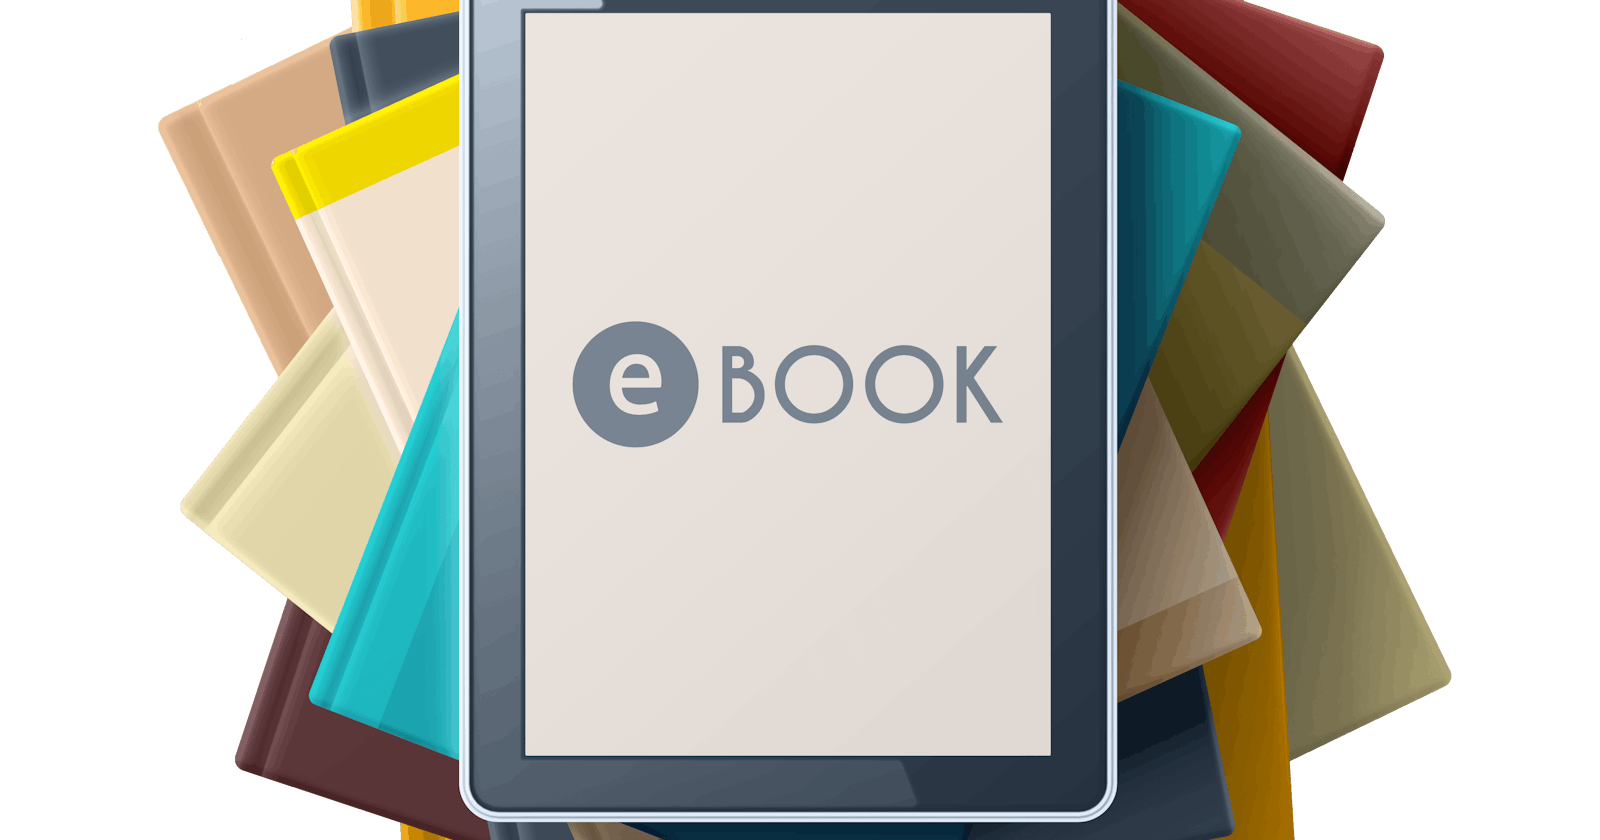 Why you shouldn't pay for an eBook